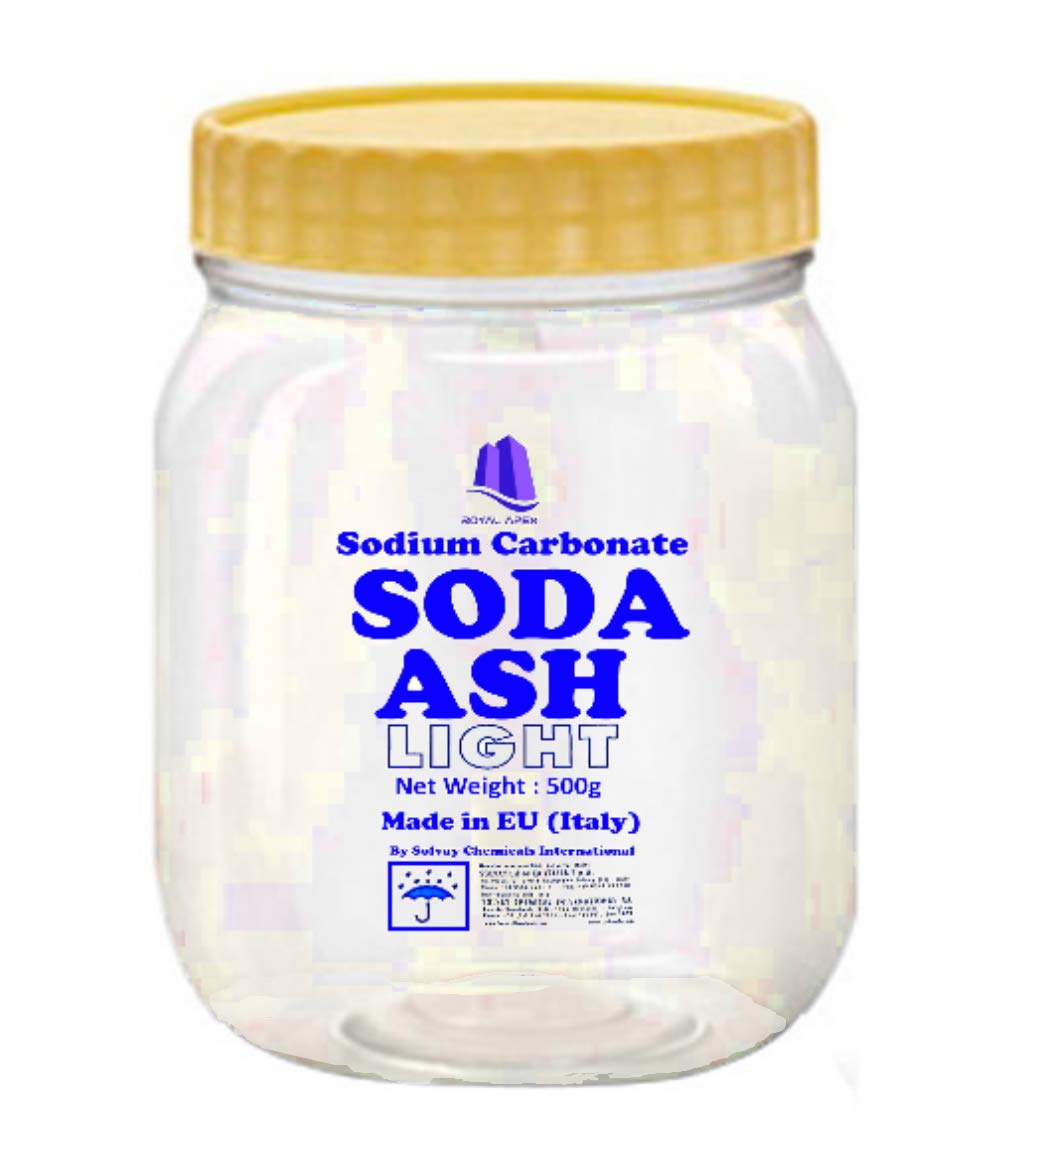 Soda Ash (Sodium carbonate Na2CO3) 500g | Soap, Makeup Products, Home Made Detergent Making Agent, Made in Italy